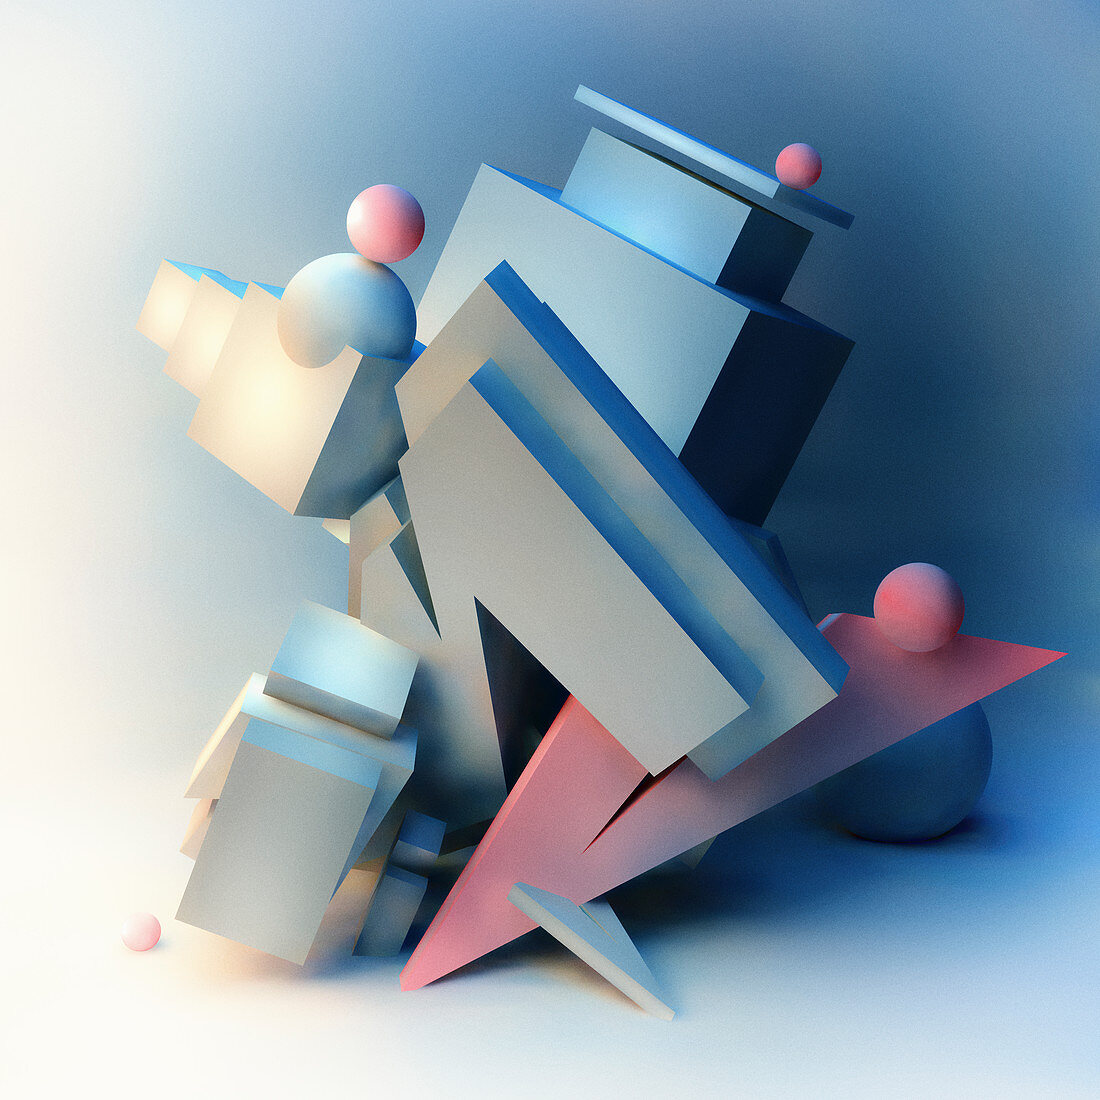 Abstract architectural sculpture, illustration